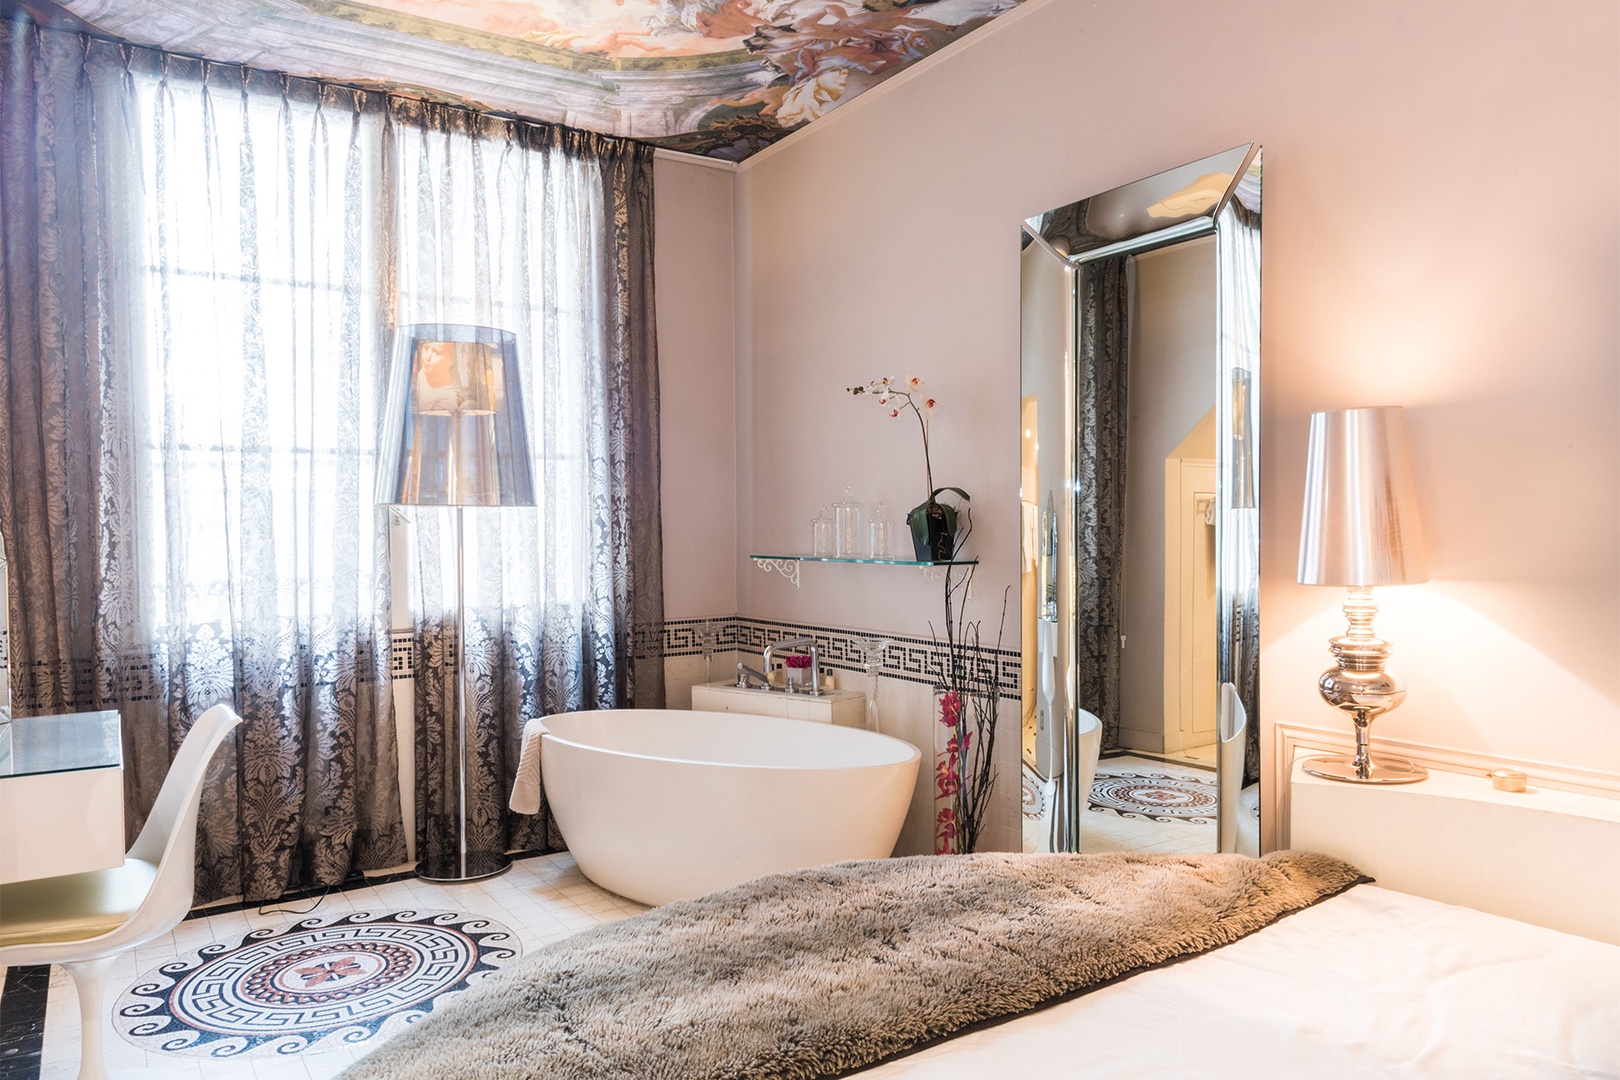 The bedroom is an oasis with a large soaking bathtub.